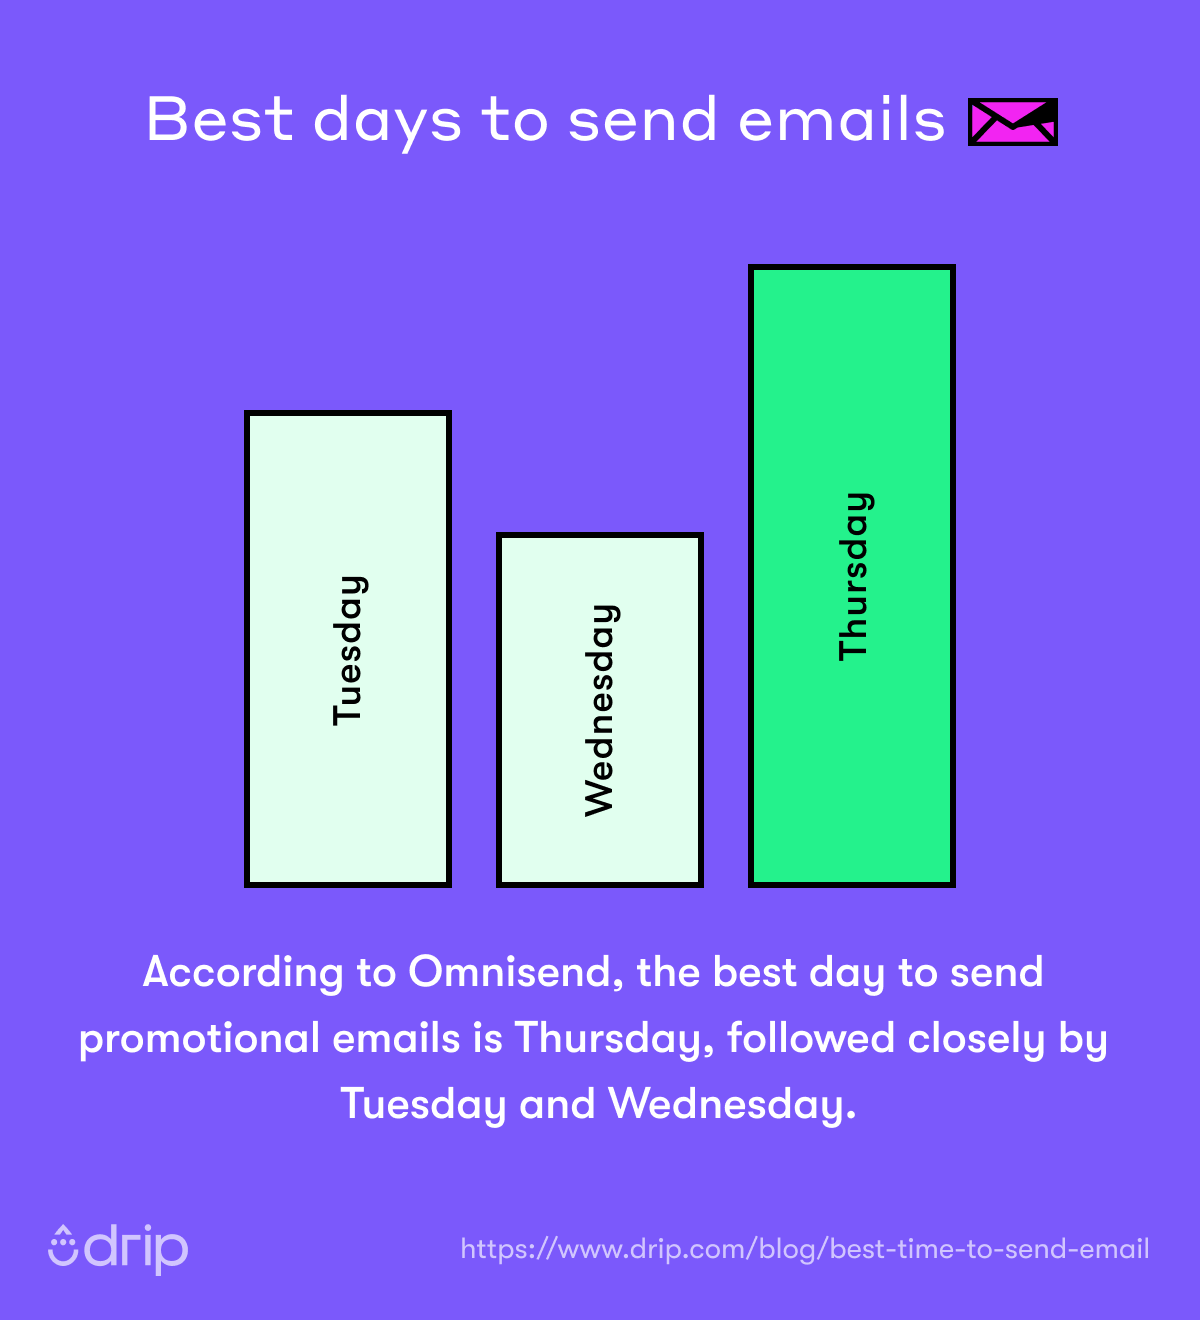 Best Time To Send Email